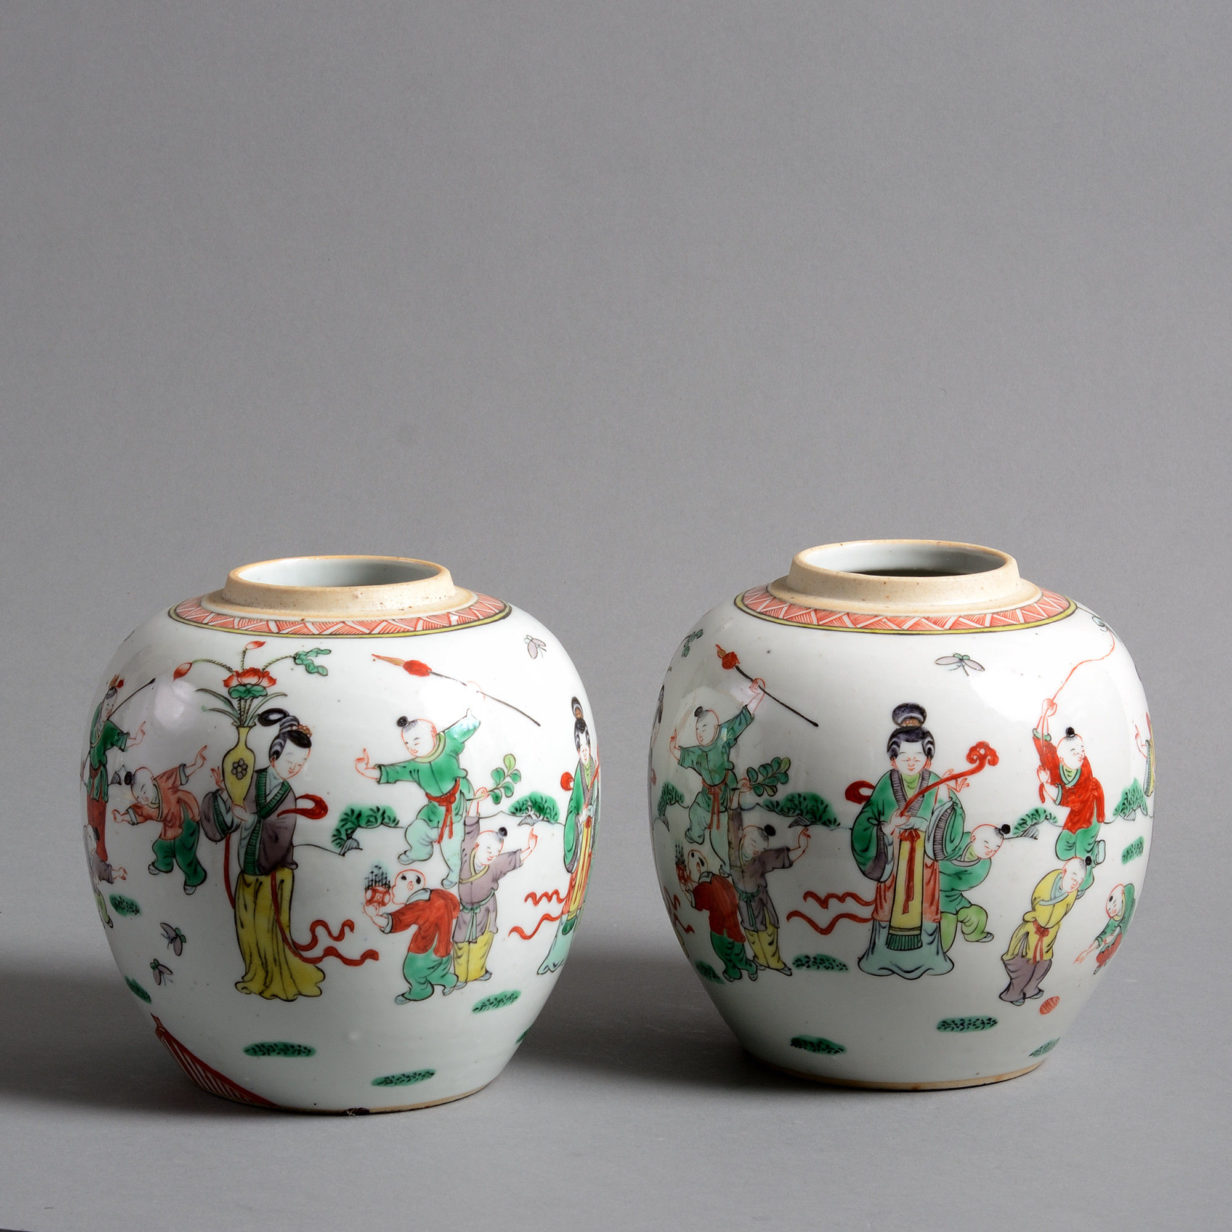 A pair of 19th century qing dynasty famille verte jars